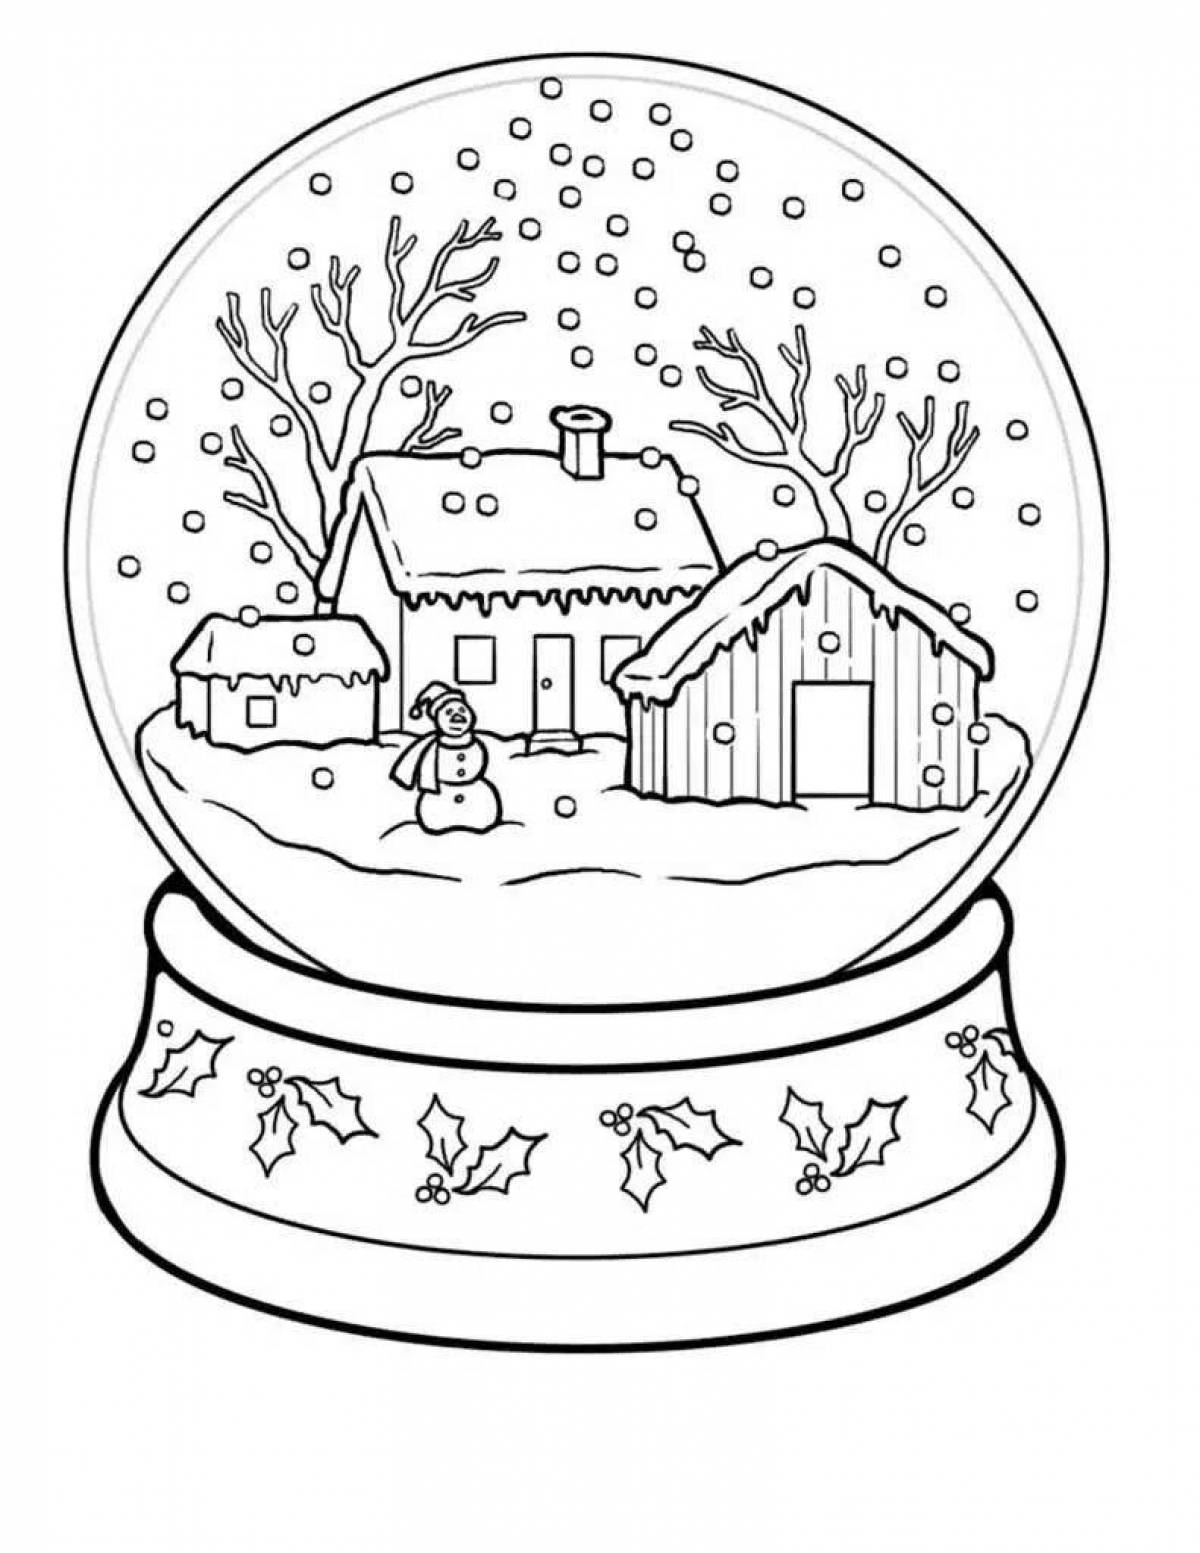 Bright Christmas coloring pages for girls 12 years old